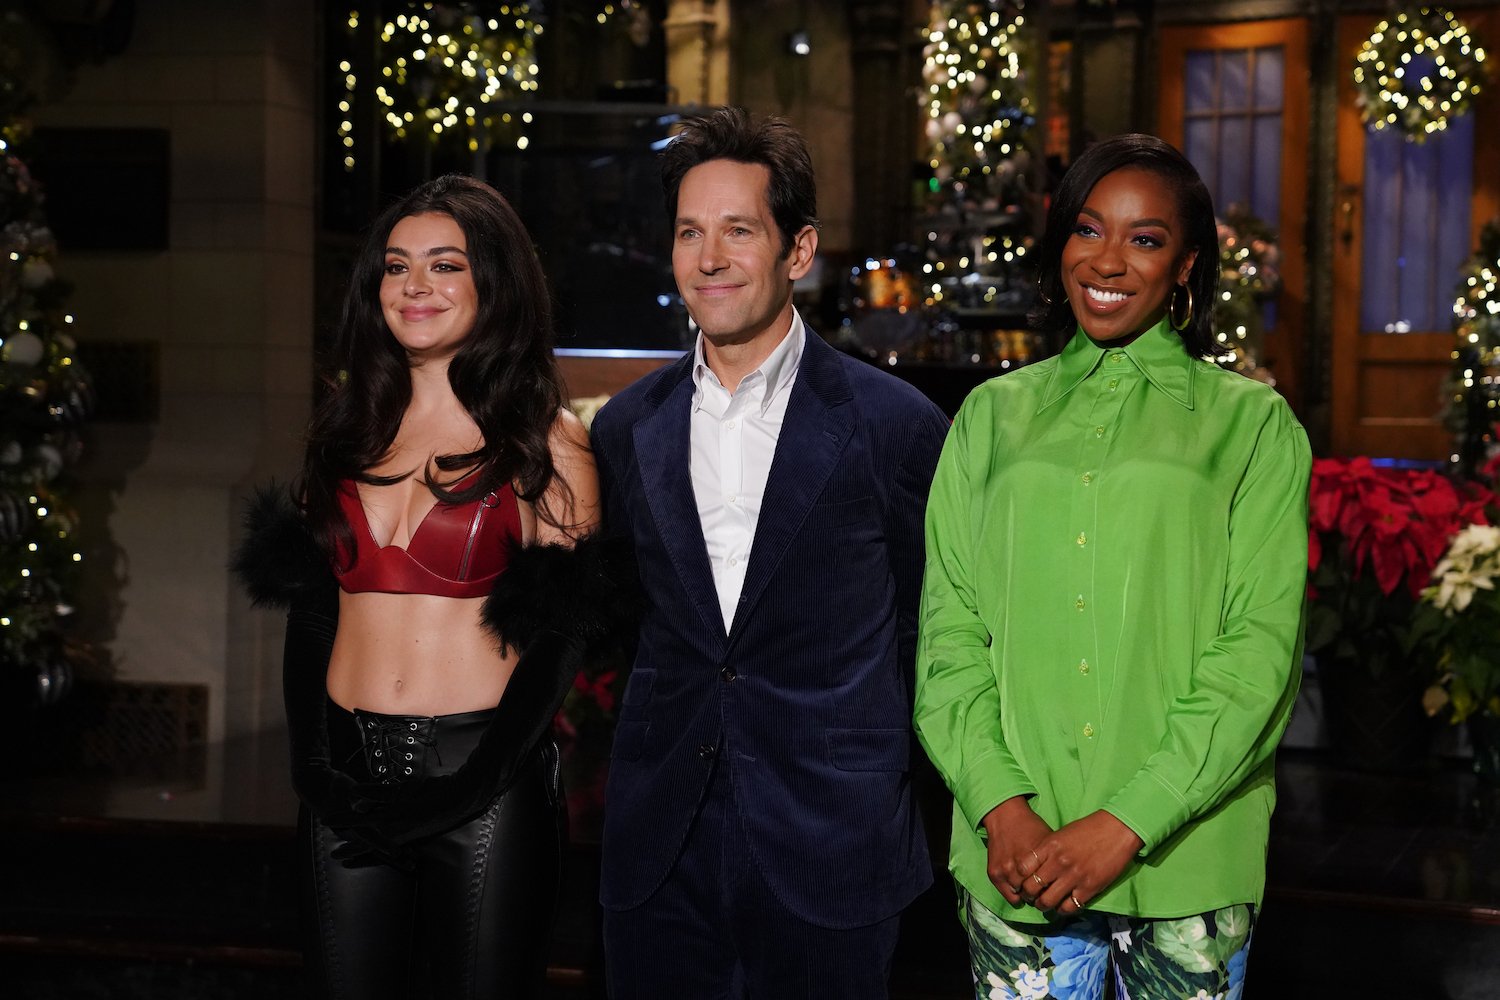 Musical guest Charli XCX, host Paul Rudd, and Ego Nwodim promoting 'SNL'